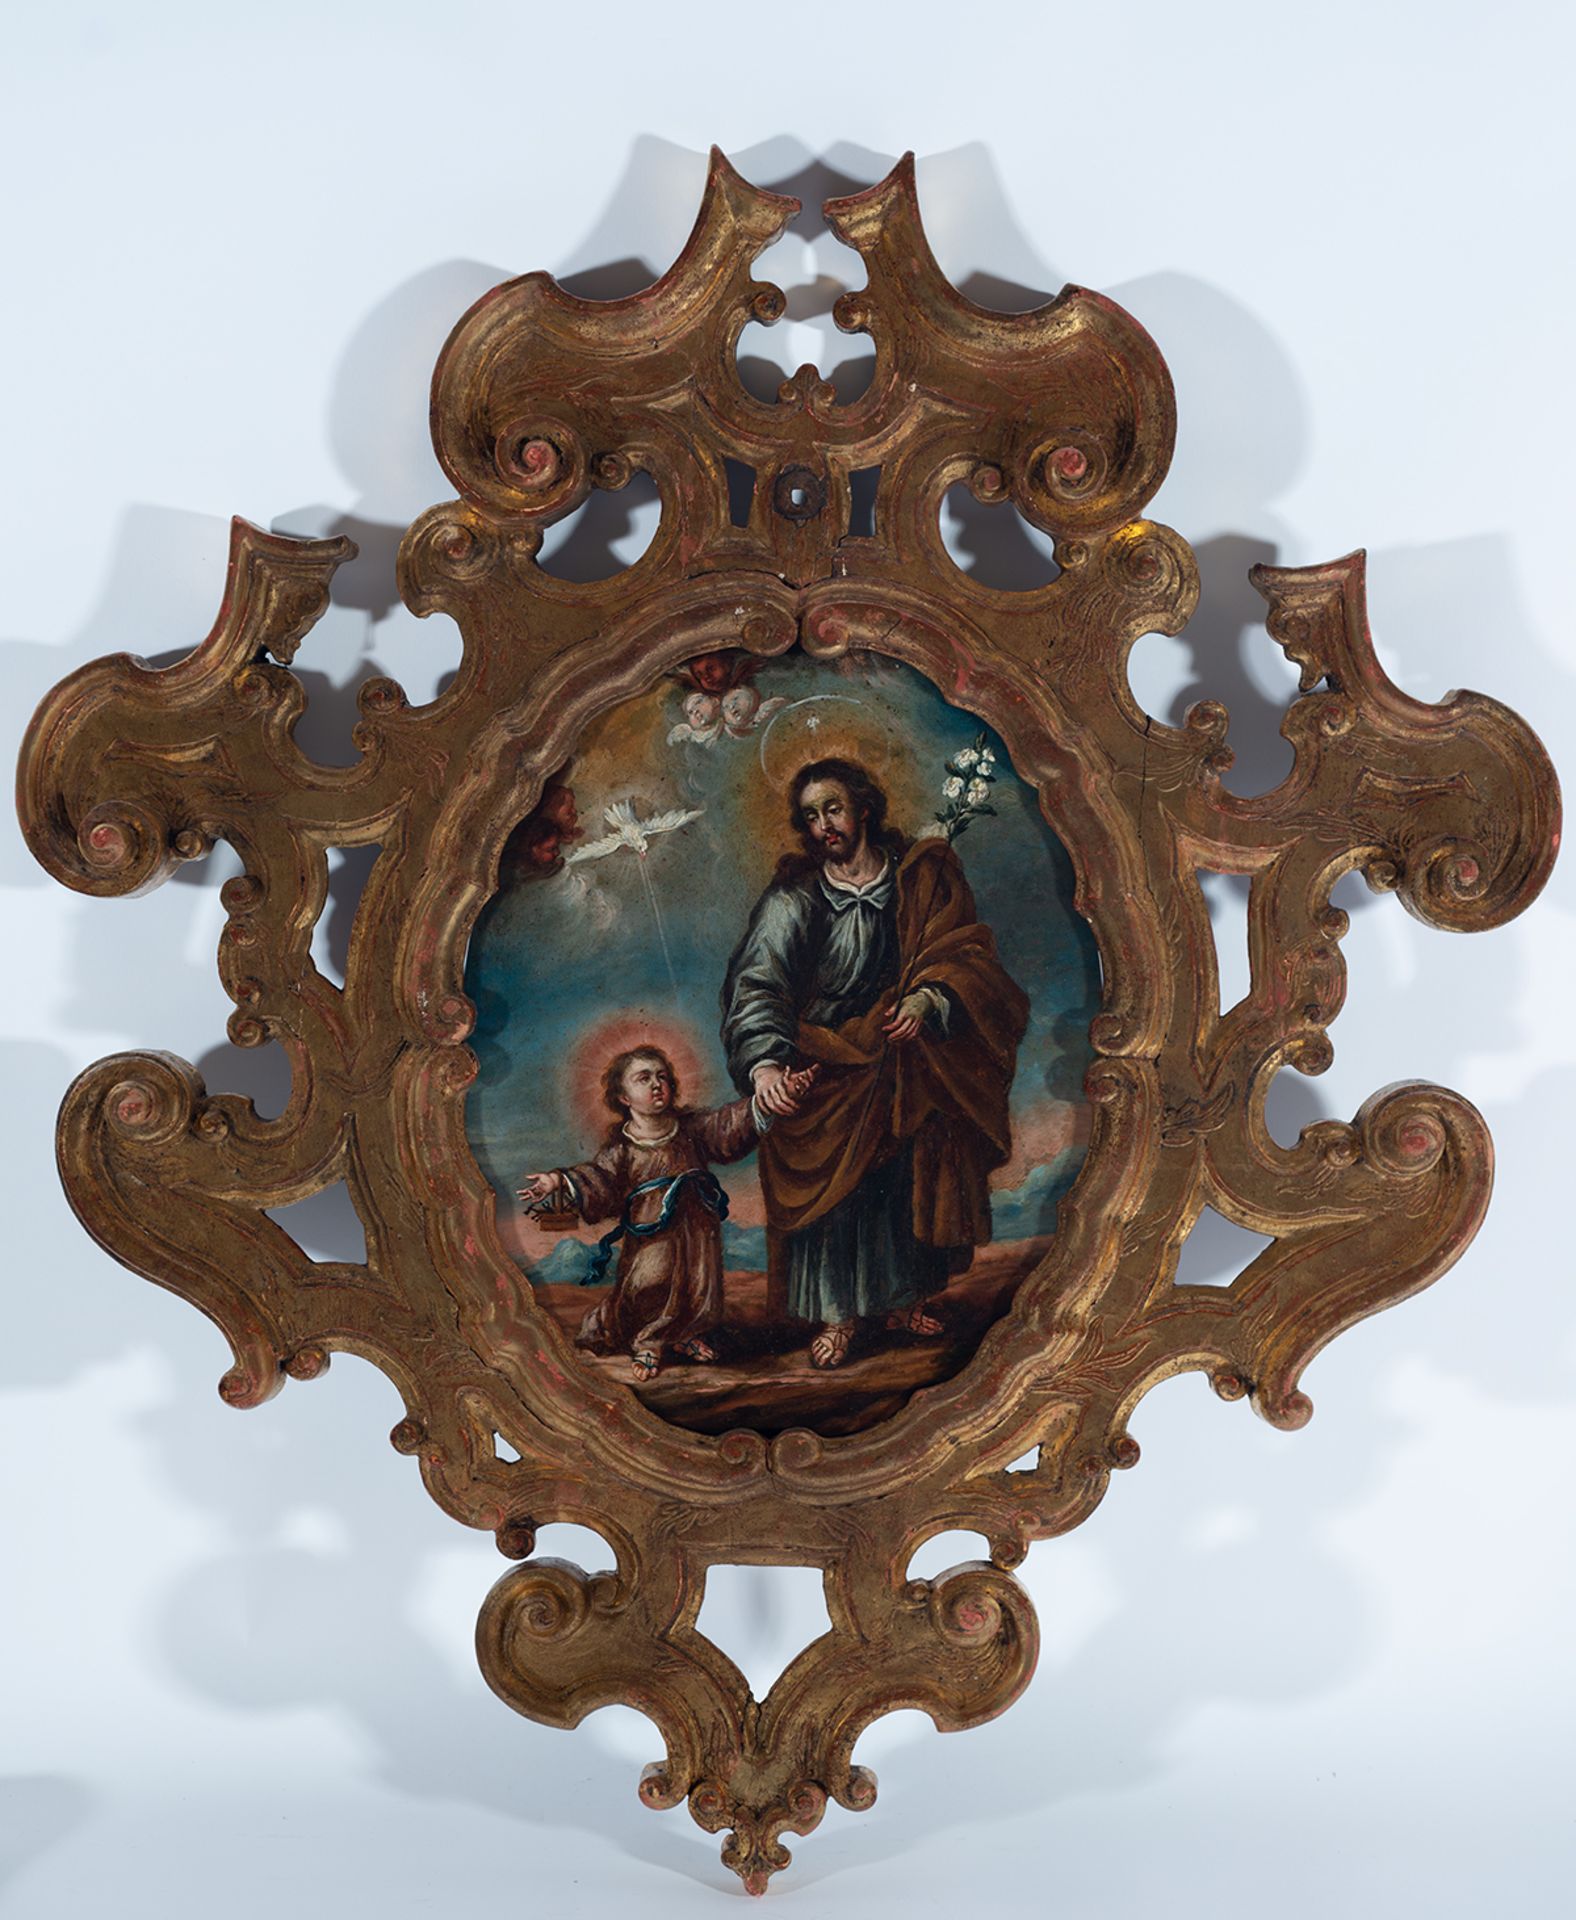 St. Joseph with Child, Mexican colonial school from the 18th century